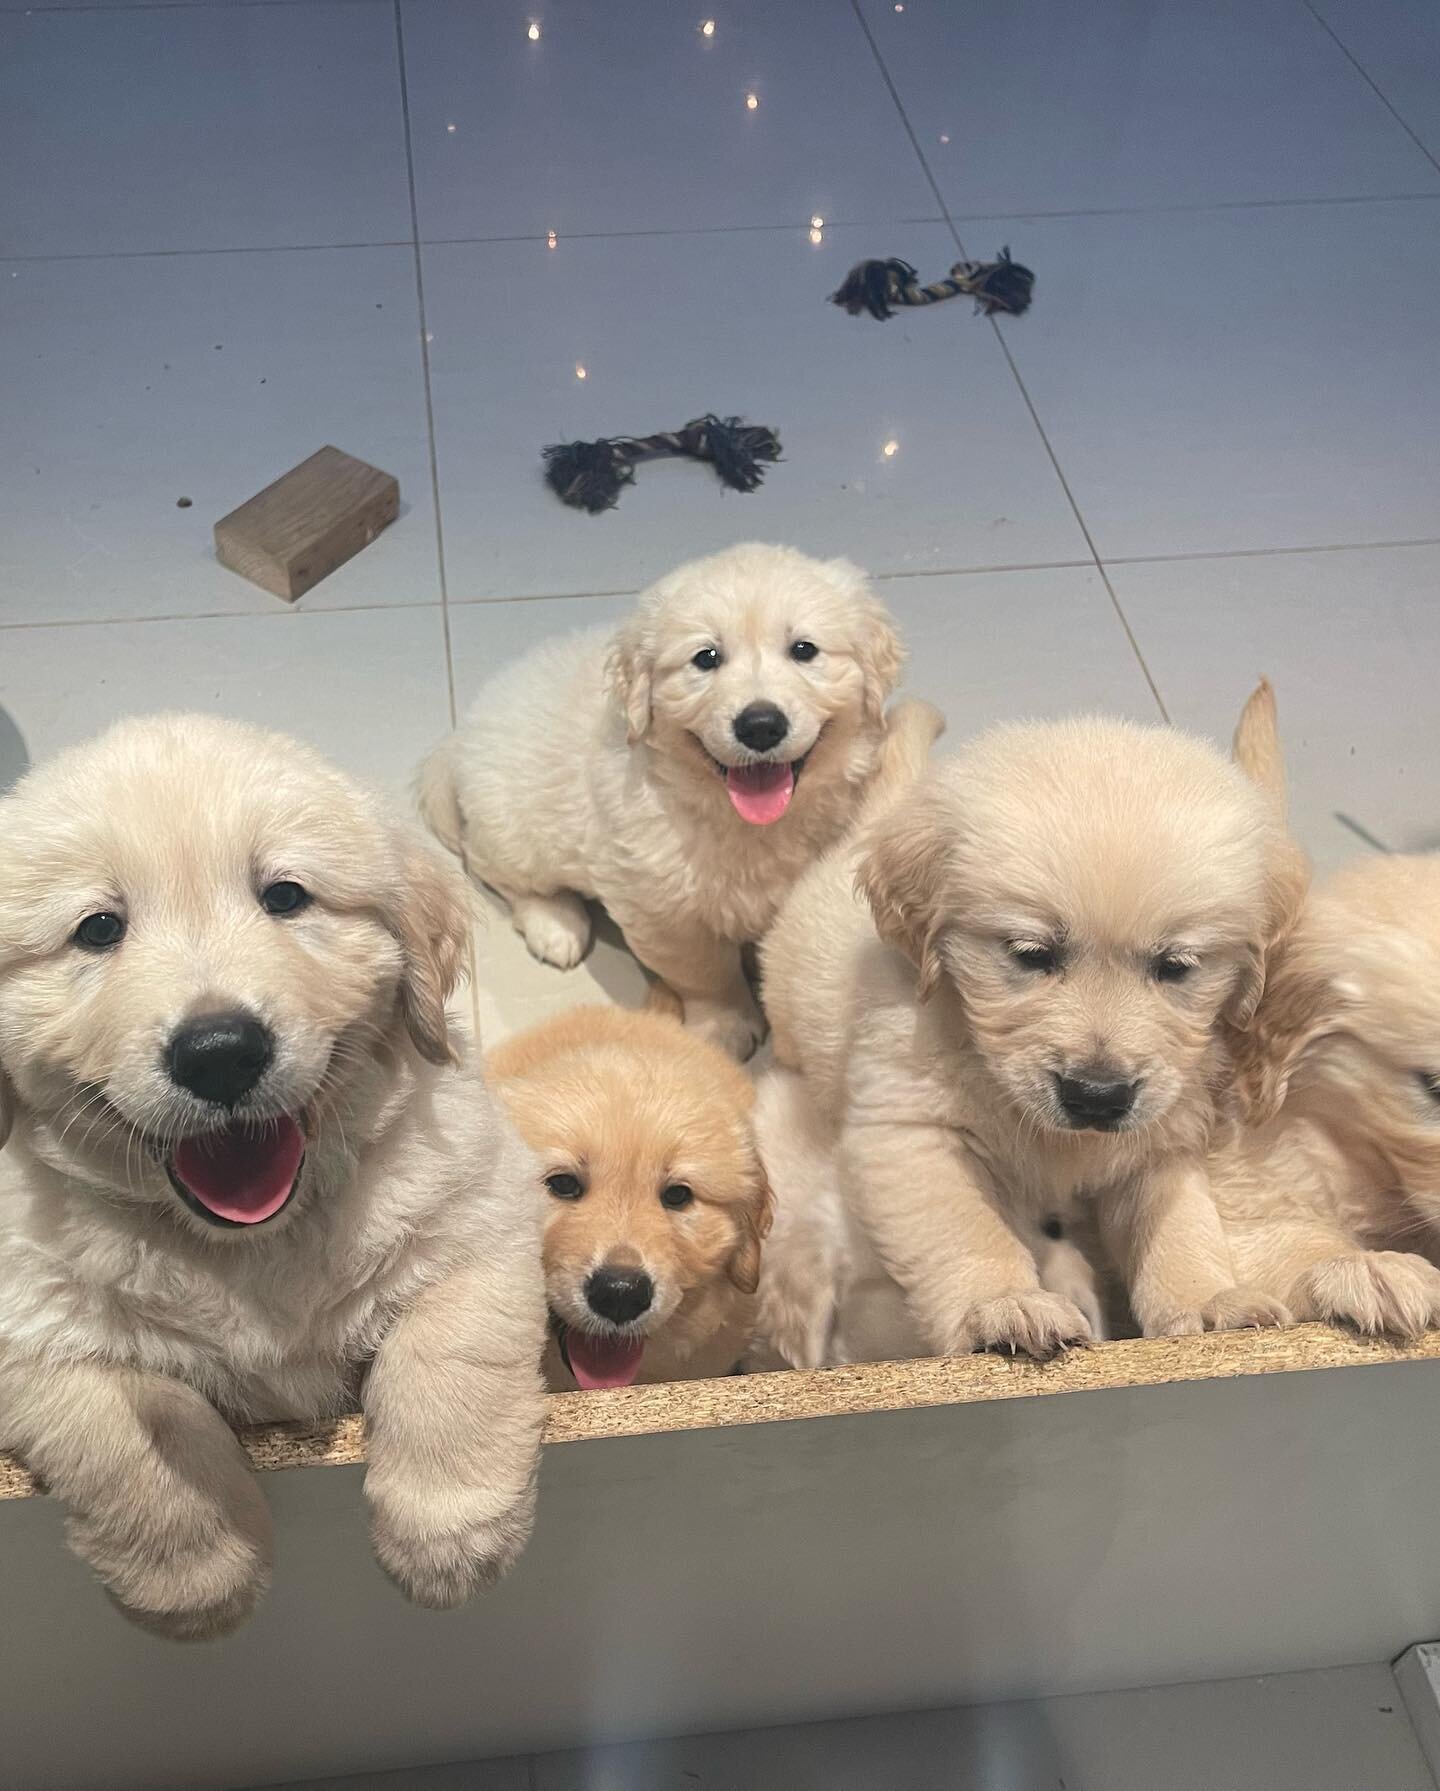 So excited for some more of these fluffy little babies to make their way to us 🥰🥰🥰 crossing our fingers and toes that Sunny&rsquo;s breeding was successful 🤞 watch this space! 

#sunshinecoast #sunshinecoastpuppies #ethicalbreeders #ethicalbreede